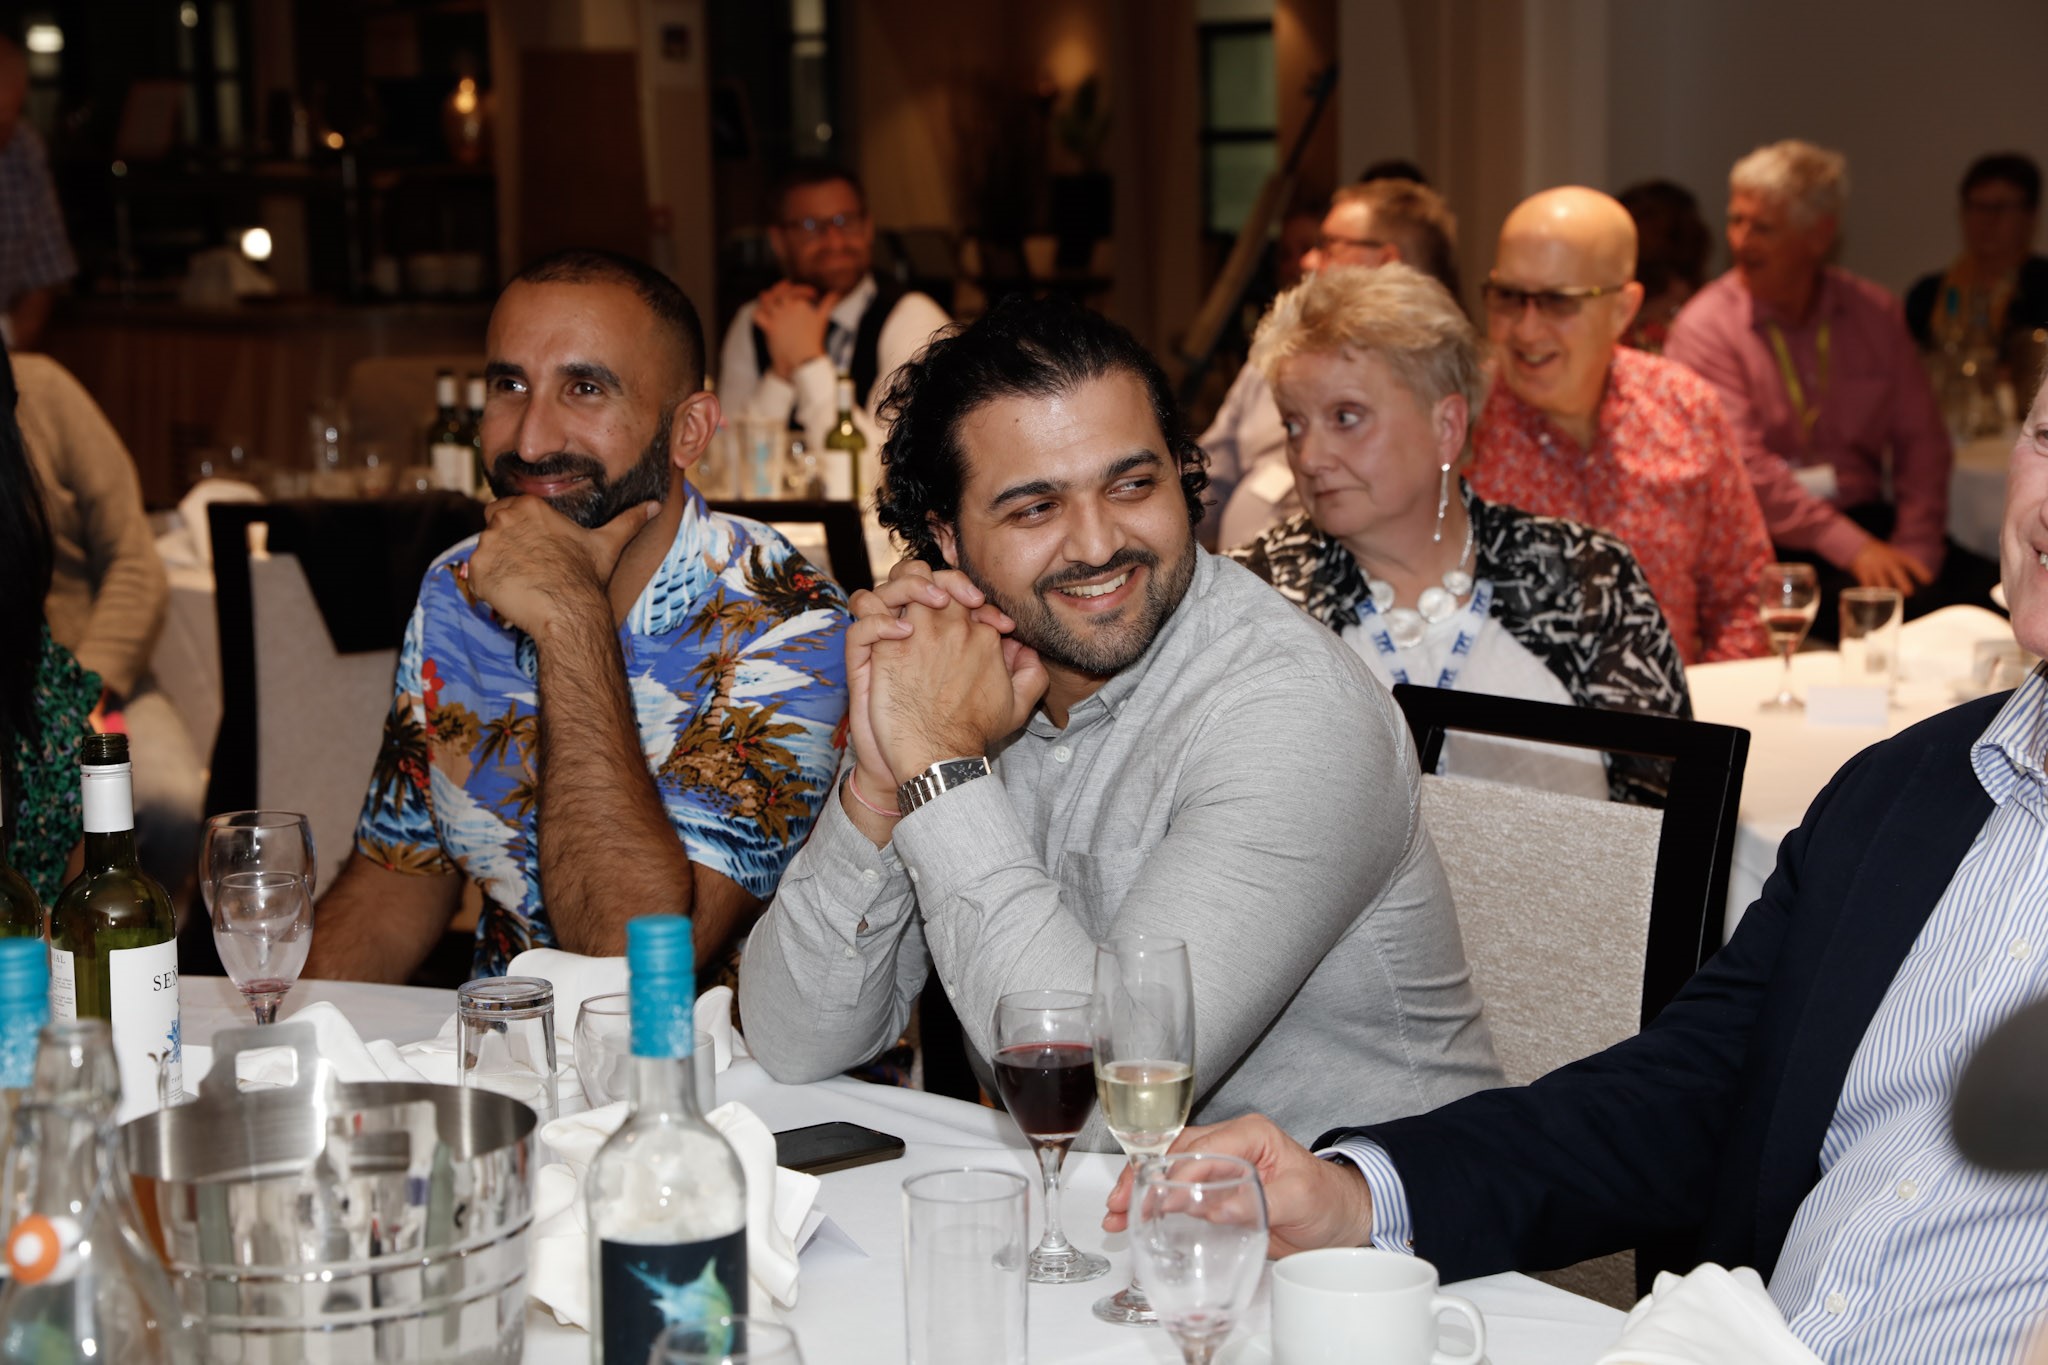 Davinder, London SLC member, pictured with his support worker Vinny, at the RPA awards. They are sitting at their dinner table, smiling.